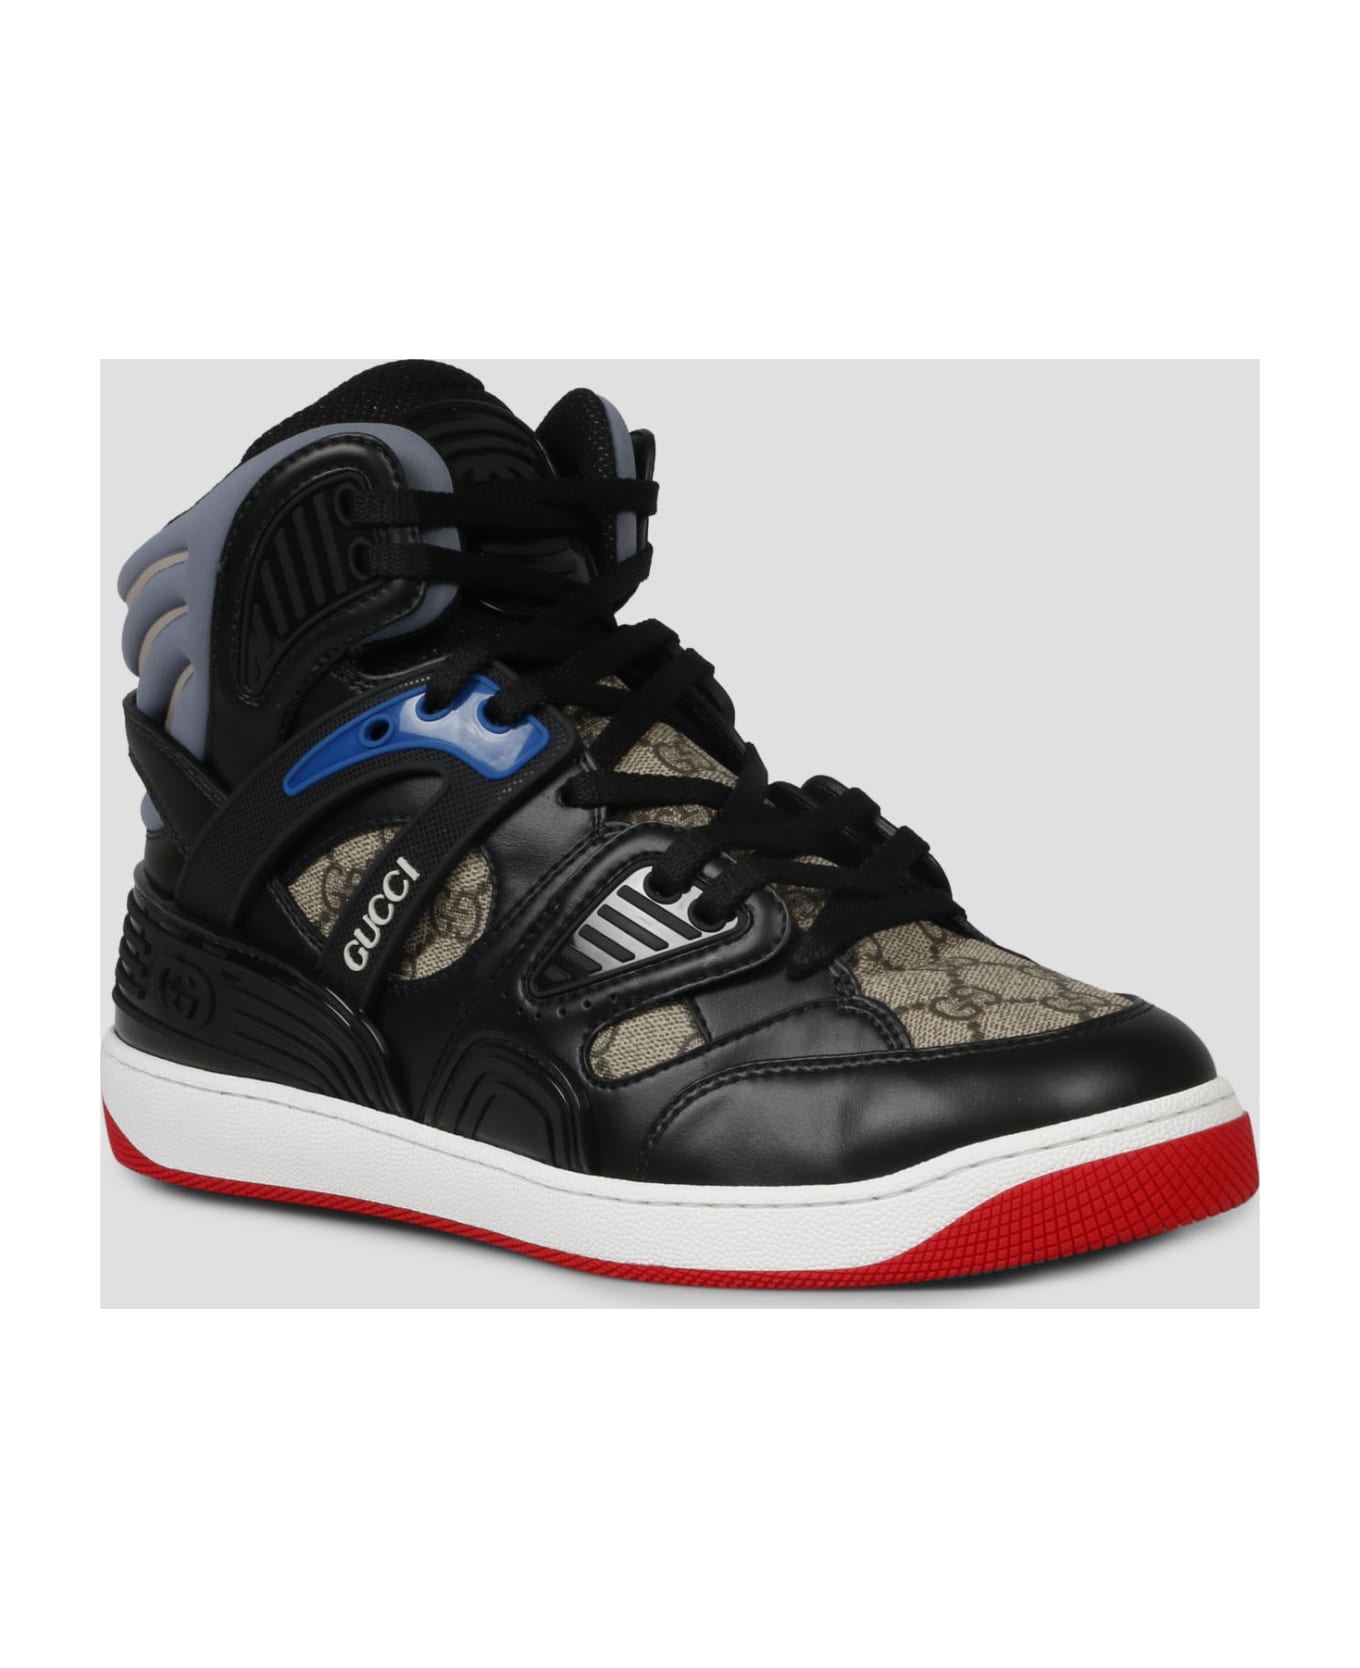 Gucci High Top Sneakers - Black